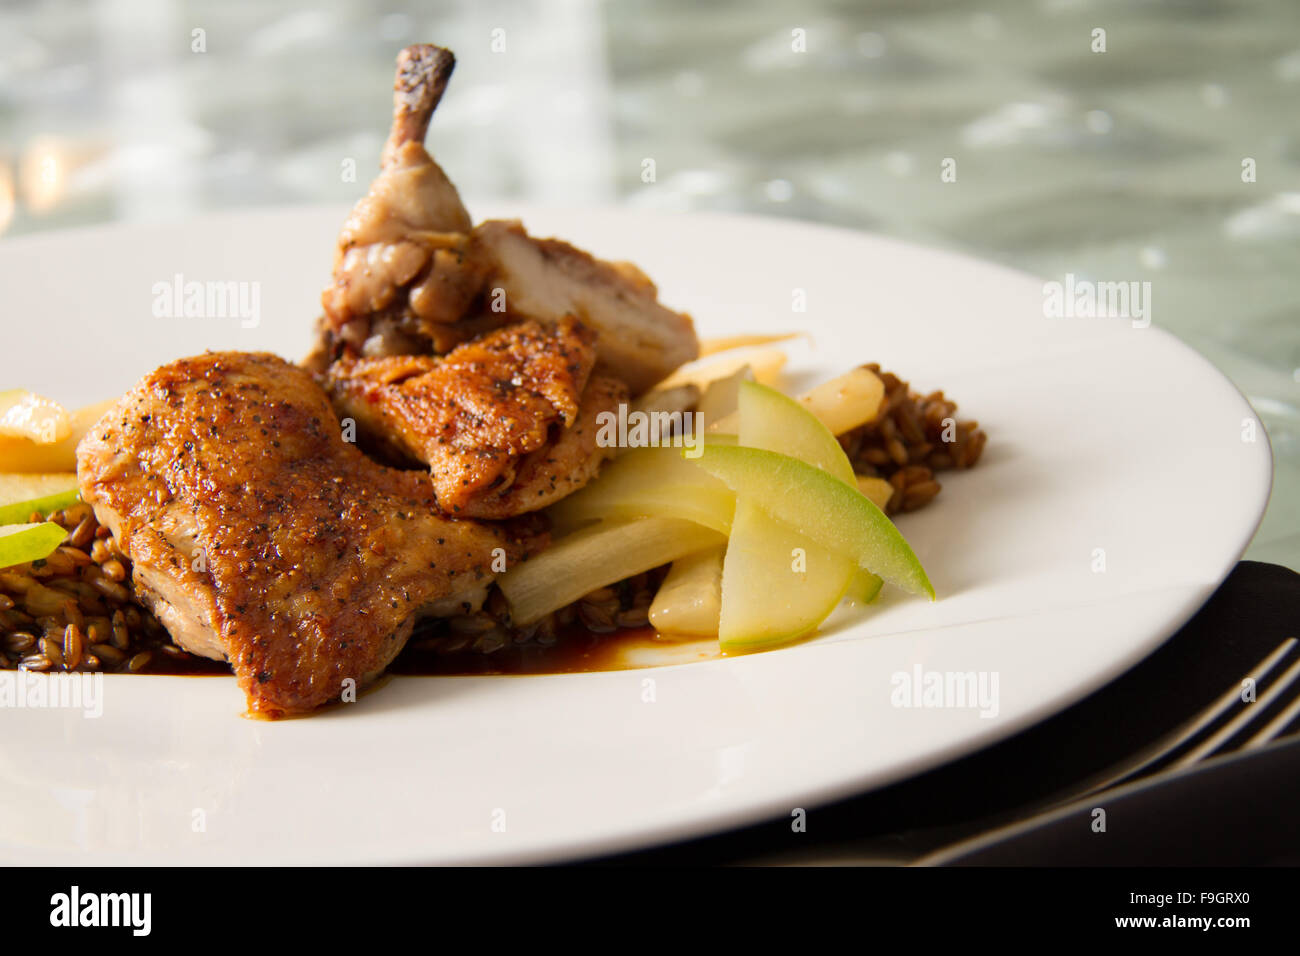 Roasted cornish game hen with toasted rye berries, compressed apple, caramelized salsify, and chartreuse jus Stock Photo